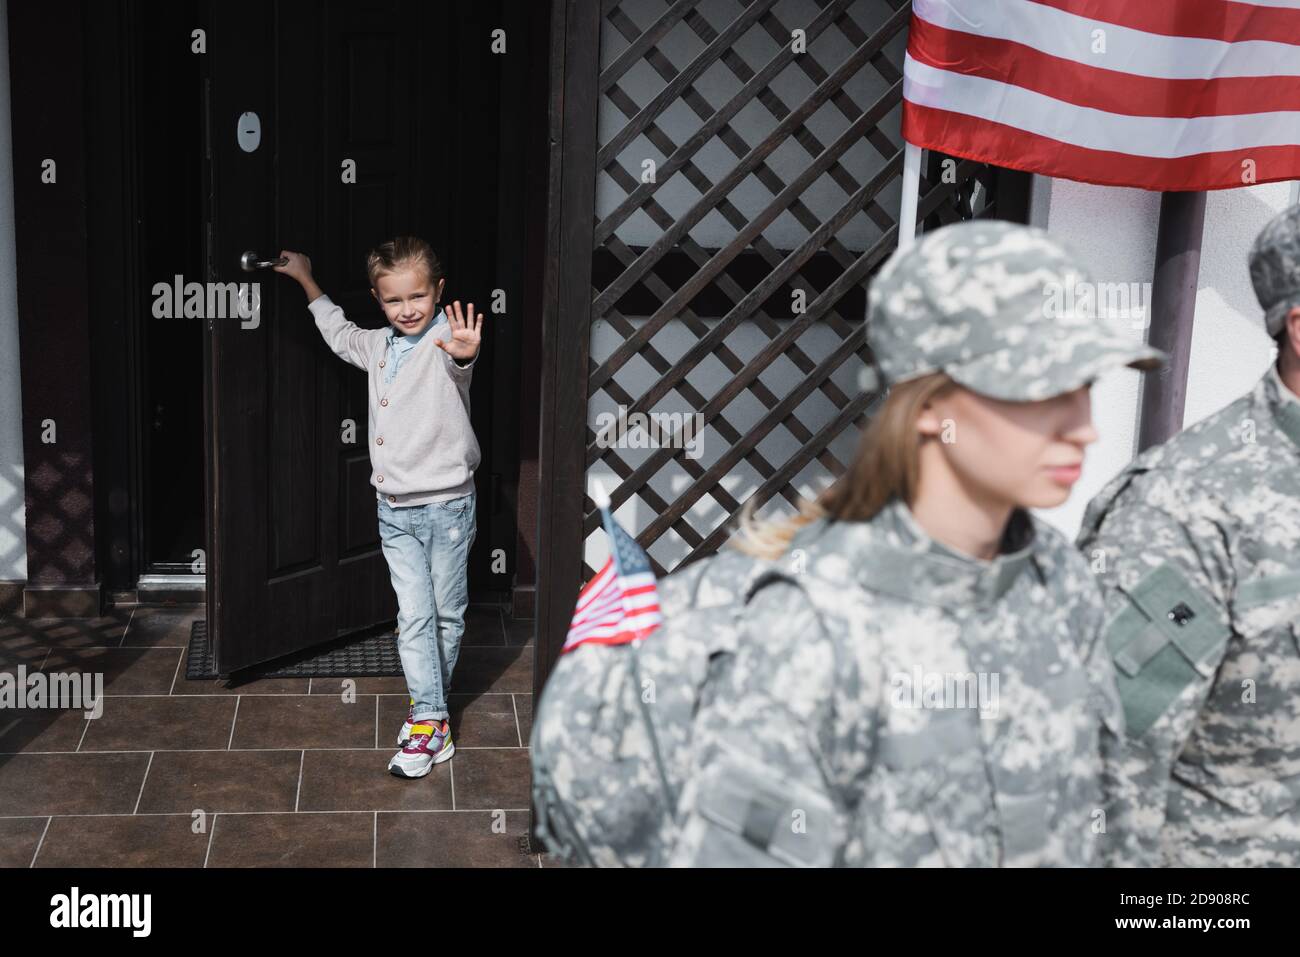 Smiling daughter with waving hand standing in doorway near american flag with blurred mother and father in military uniforms on foreground Stock Photo